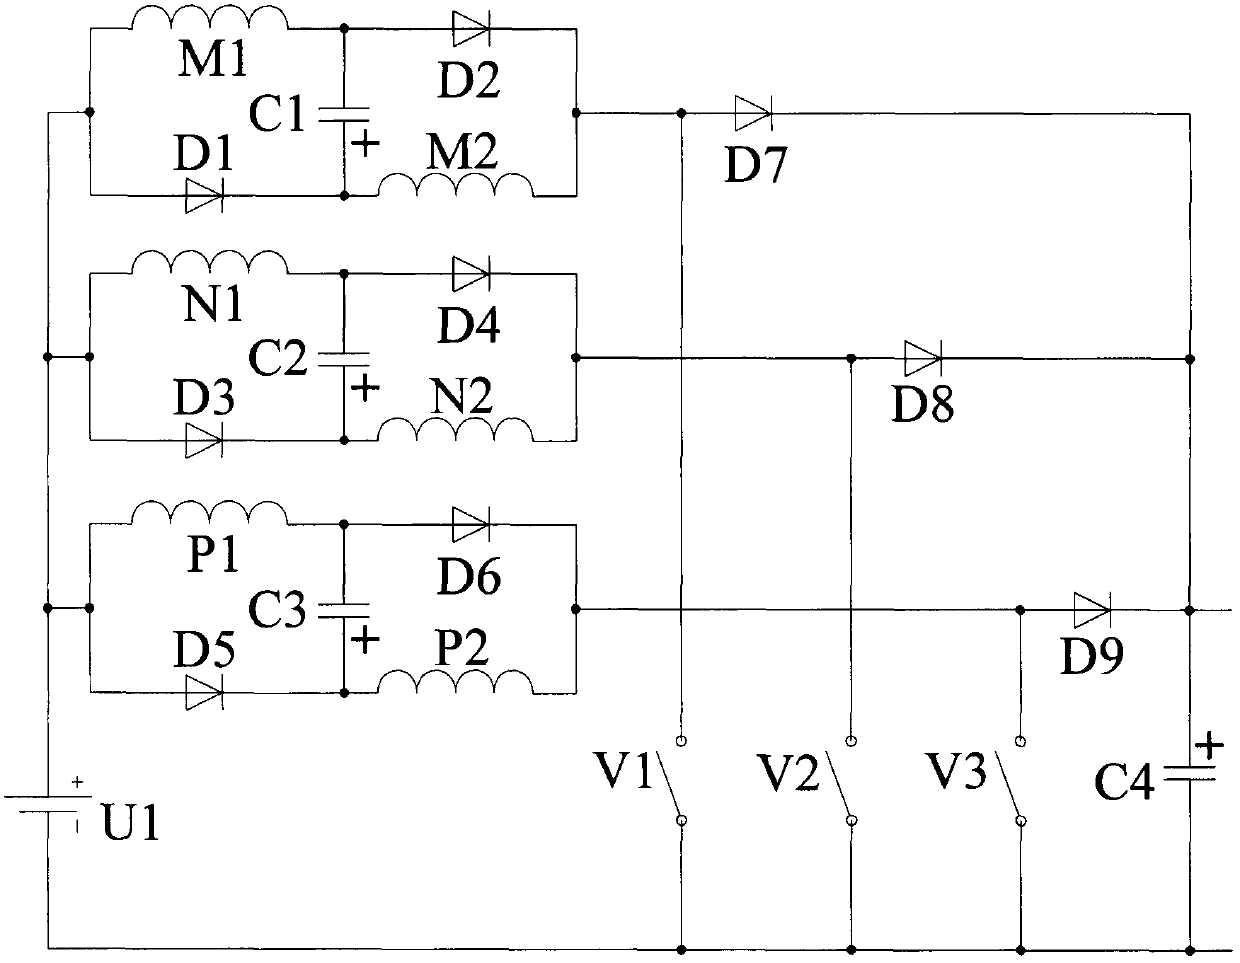 A High Voltage Converter System for Switched Reluctance Wind Power Generator